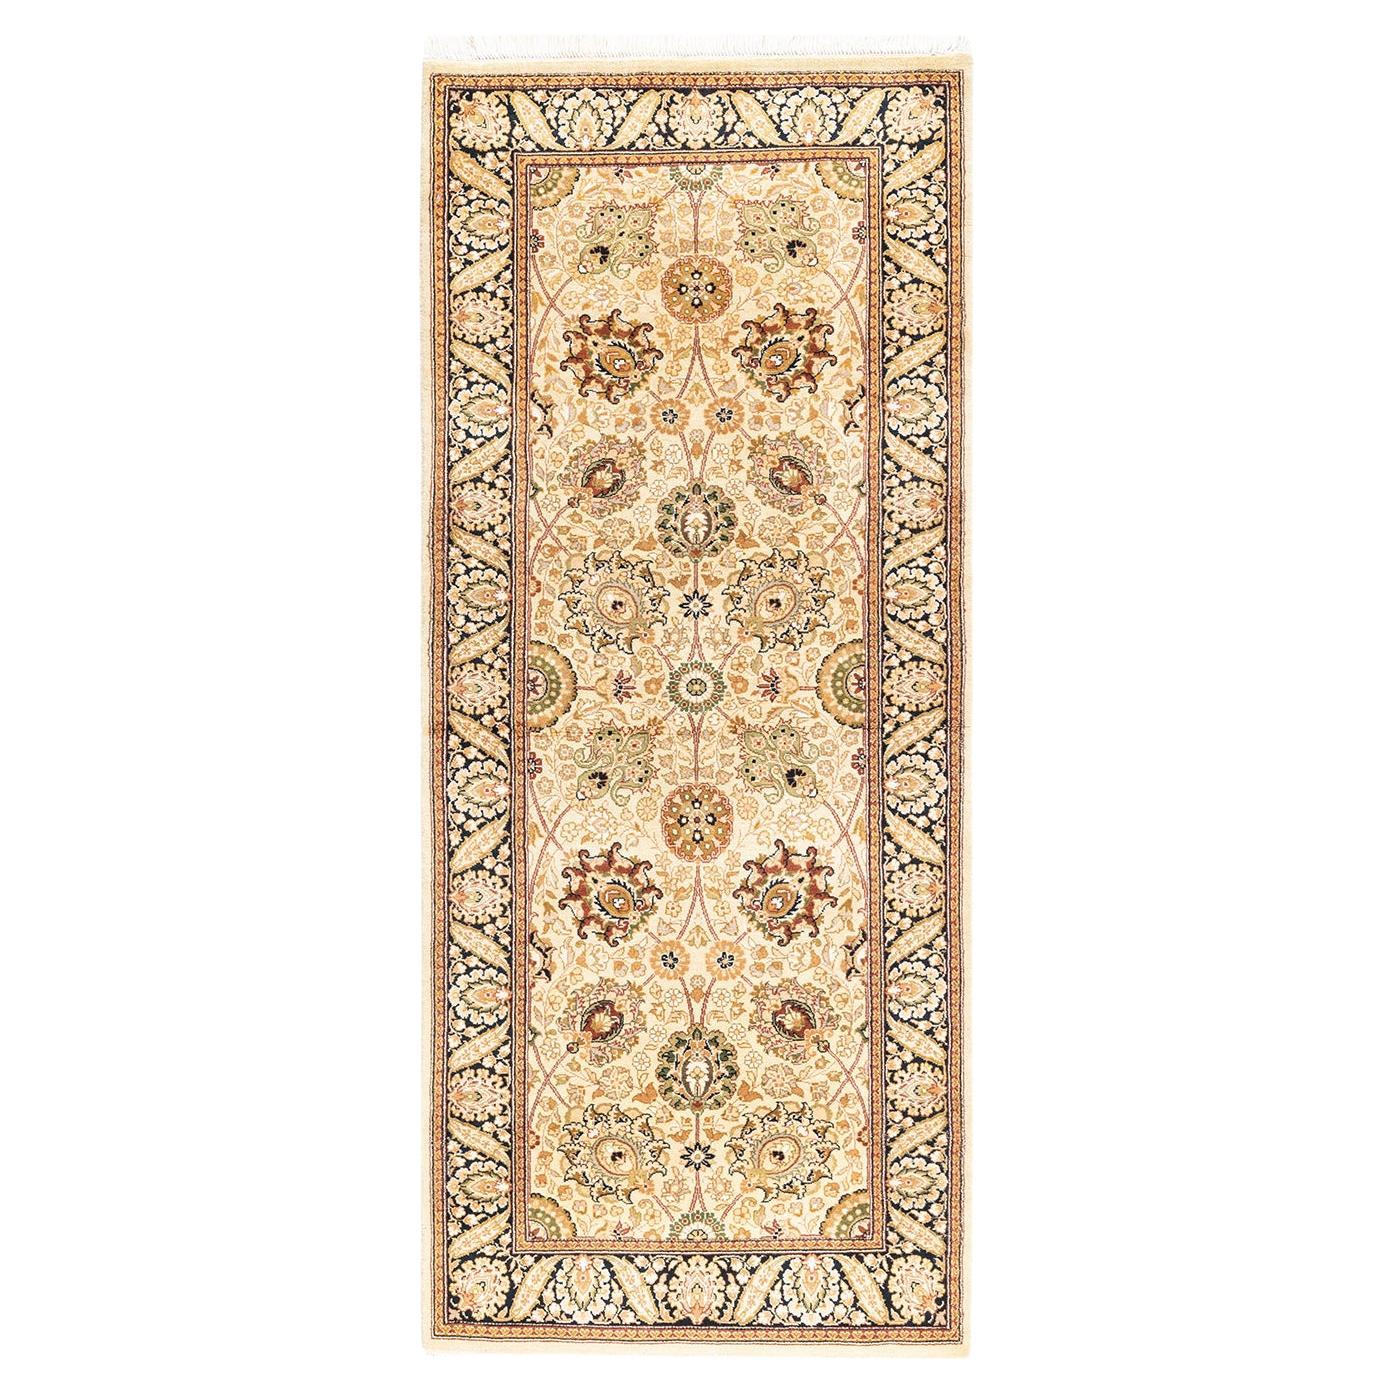 Traditional Mogul Hand Knotted Wool Beige Runner